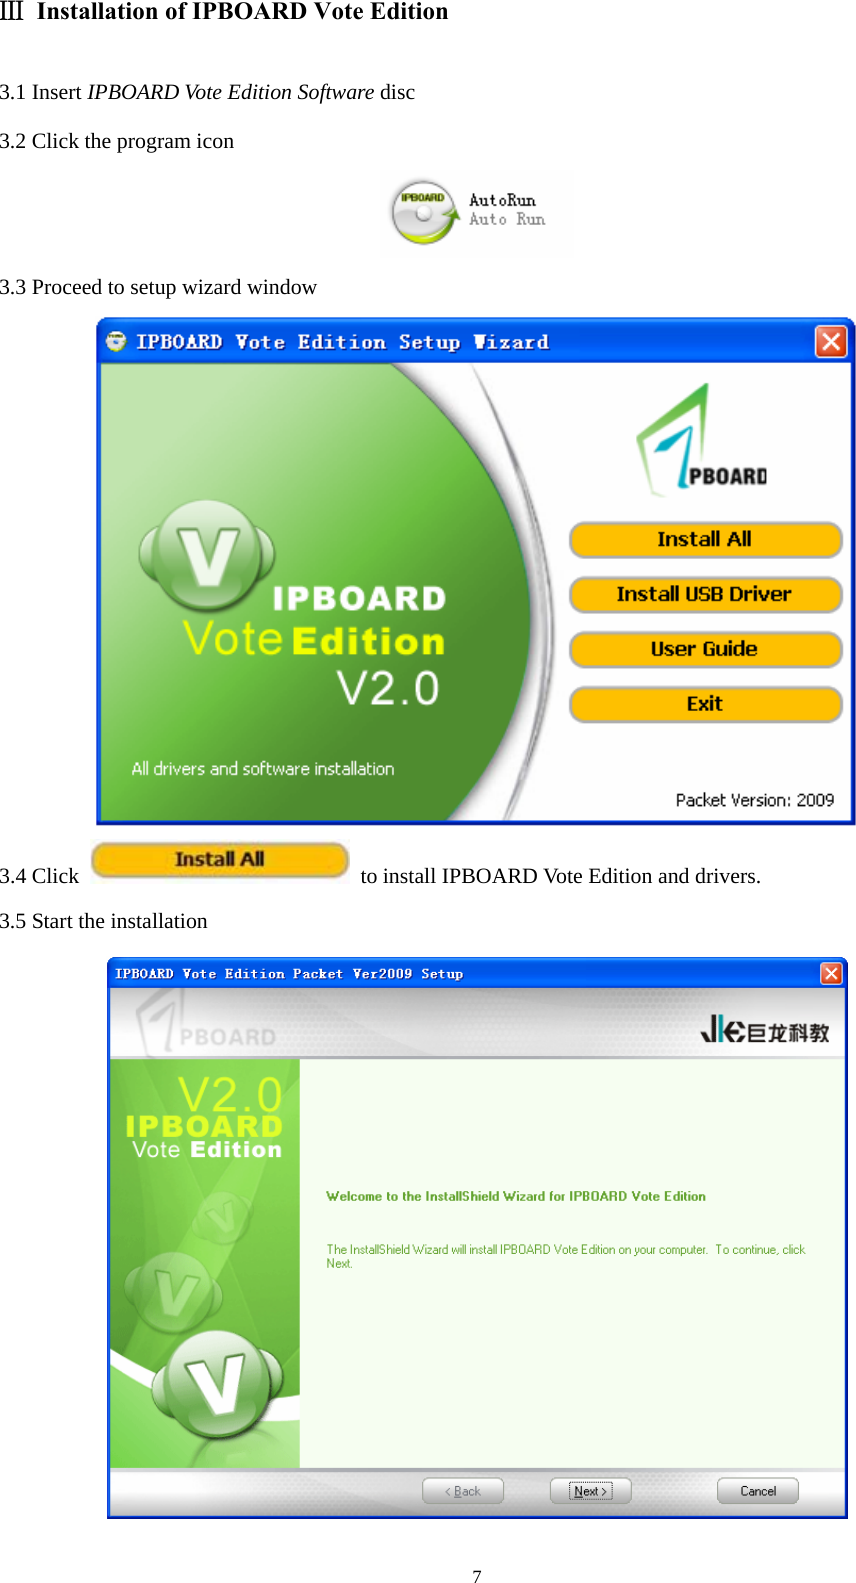  7Ⅲ  Installation of IPBOARD Vote Edition 3.1 Insert IPBOARD Vote Edition Software disc 3.2 Click the program icon  3.3 Proceed to setup wizard window  3.4 Click   to install IPBOARD Vote Edition and drivers. 3.5 Start the installation  